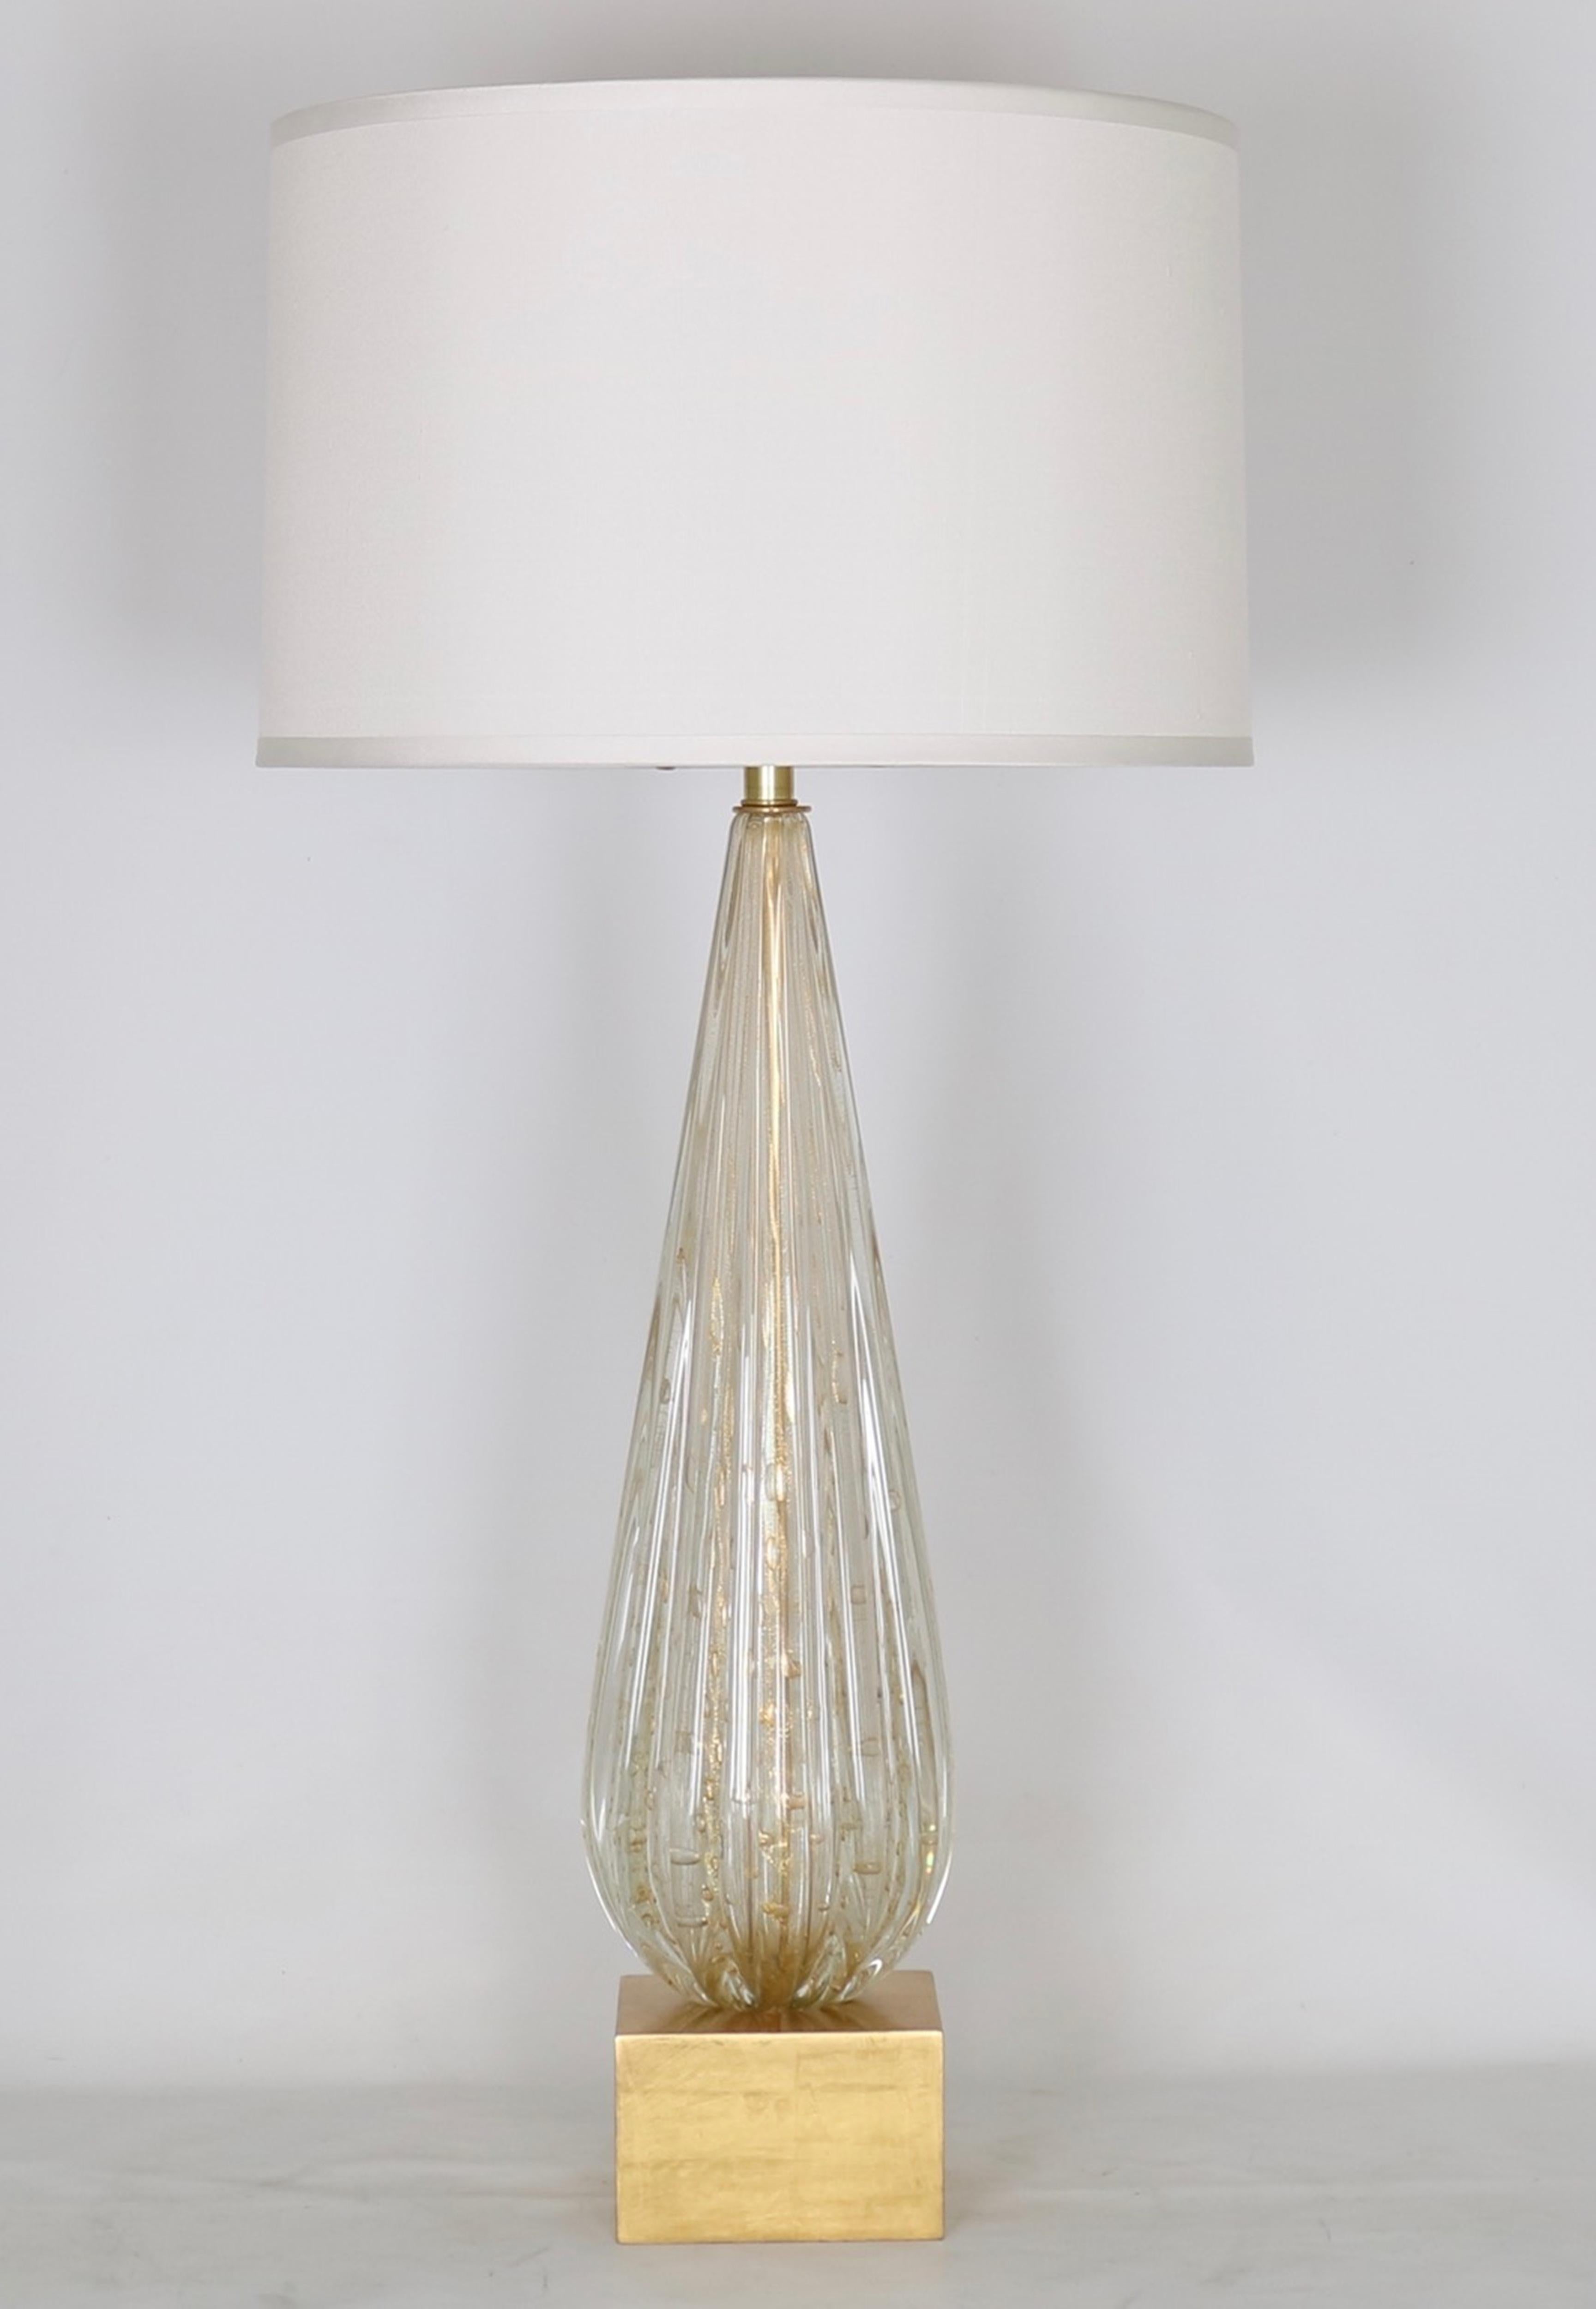 20th Century Hollywood Regency Barovier Lamp in Murano Glass with Gold Inclusions